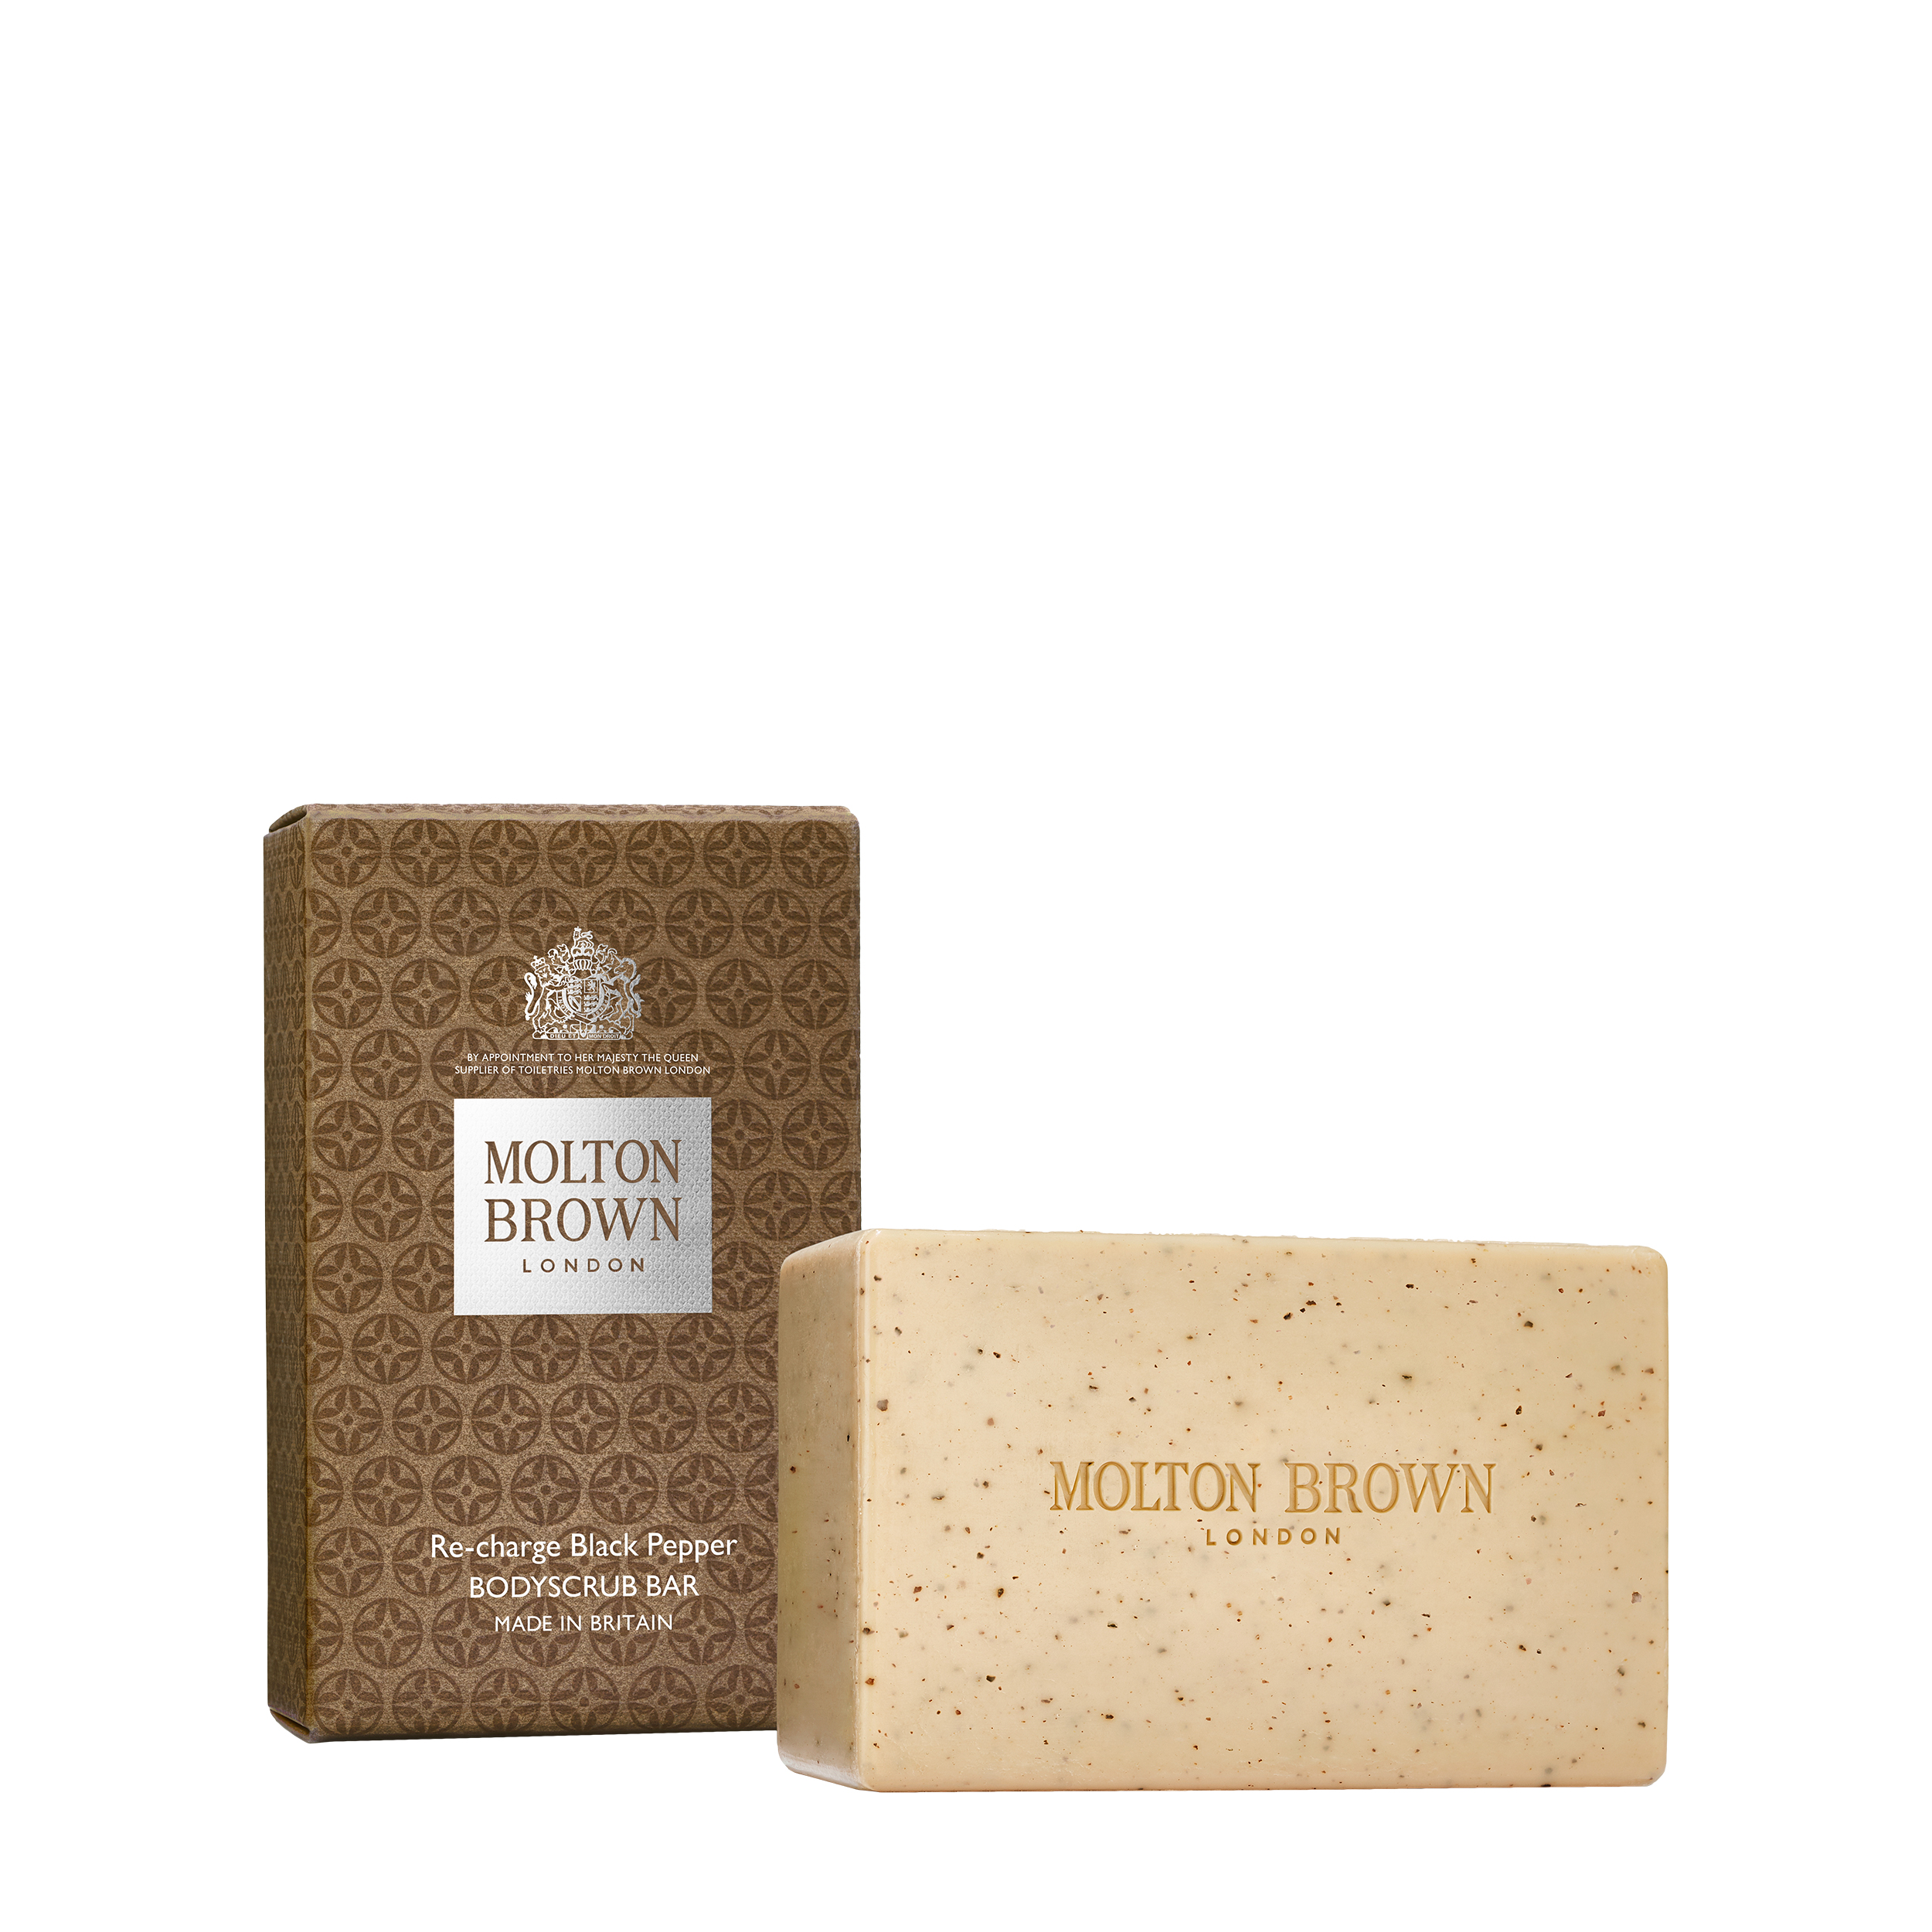 Molton Brown Molton Brown Мыло-скраб для тела Re-Charge Black Pepper 250 гр от Foambox